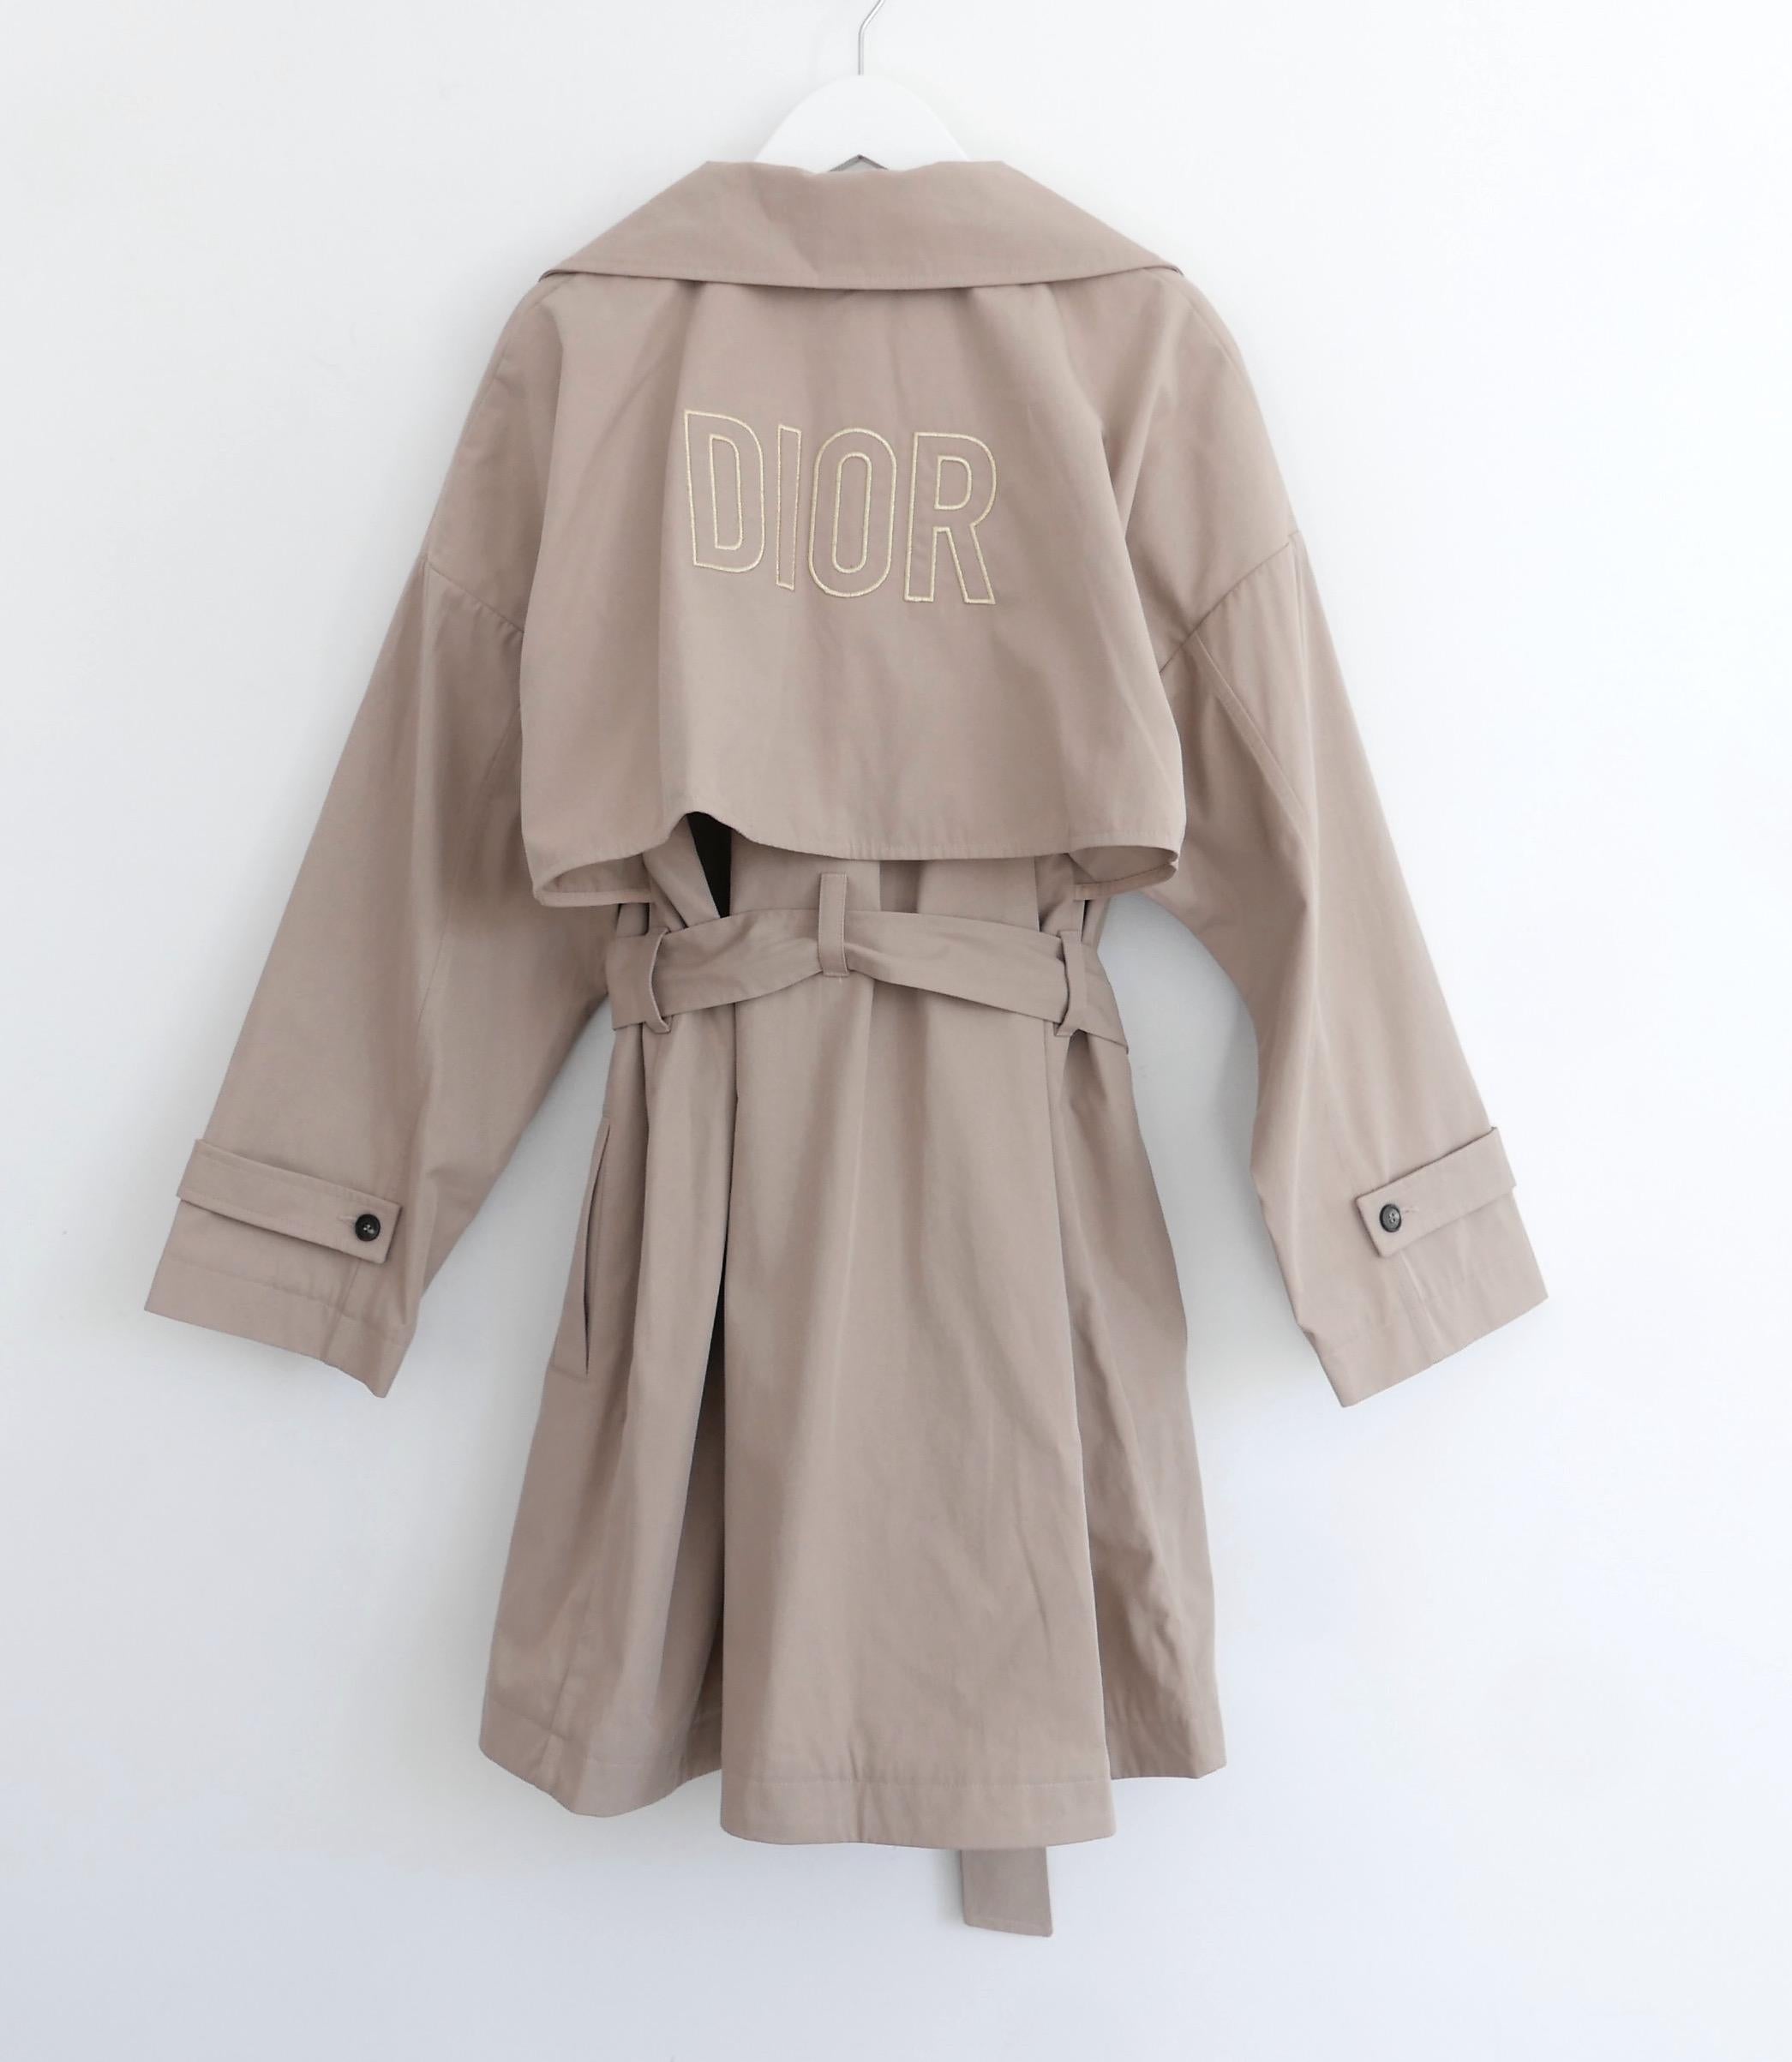 Exquisite Christian Dior girl’s trench coat.  Size 13A and will easily fit an adult too. 

Bought for £1850 and new with tags. 

Made from crisp, smooth shower proof dun coloured cotton with metallic gold embroidered  DIOR logo to back. It is